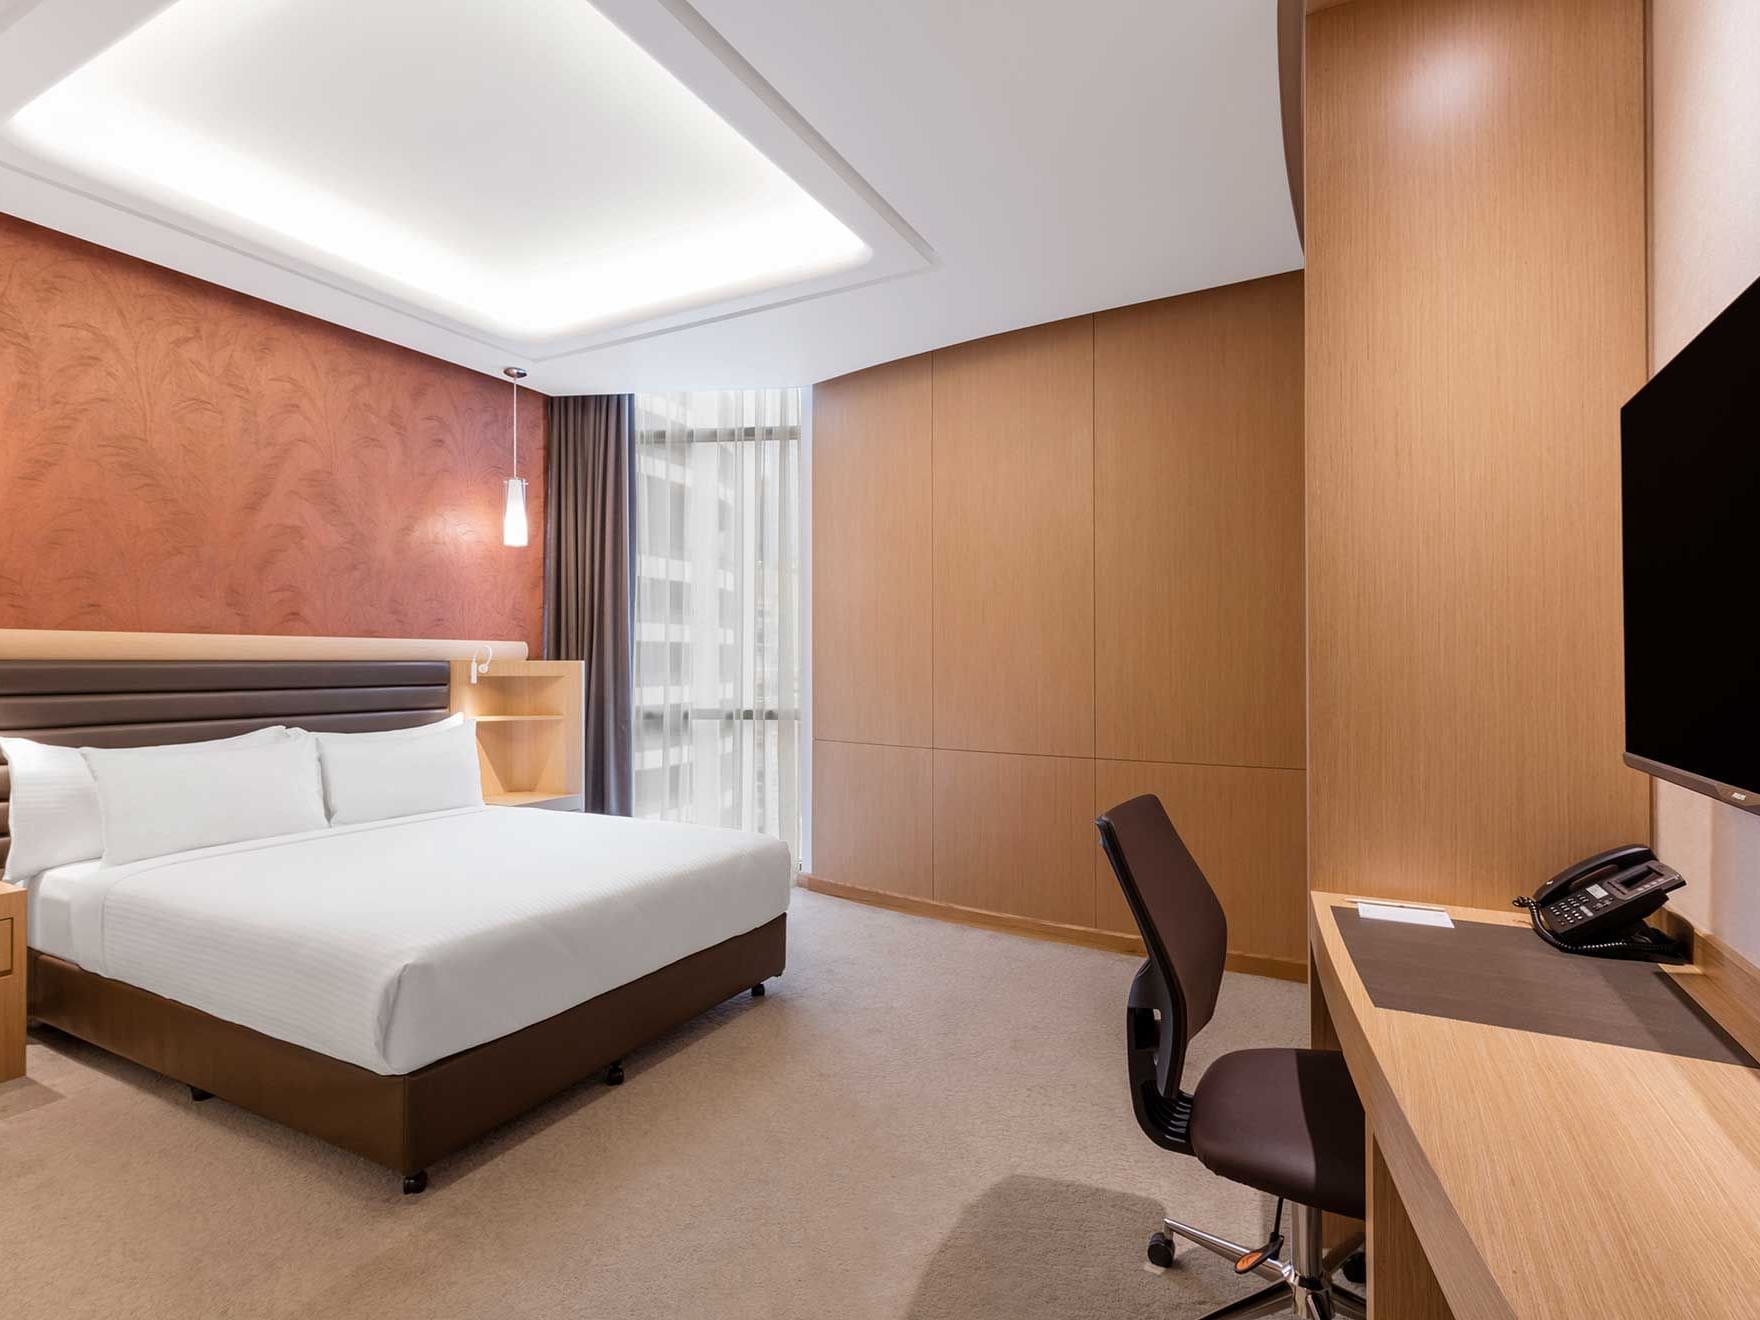 Premium Queen Room with TV & Office Space at Tank Stream Sydney